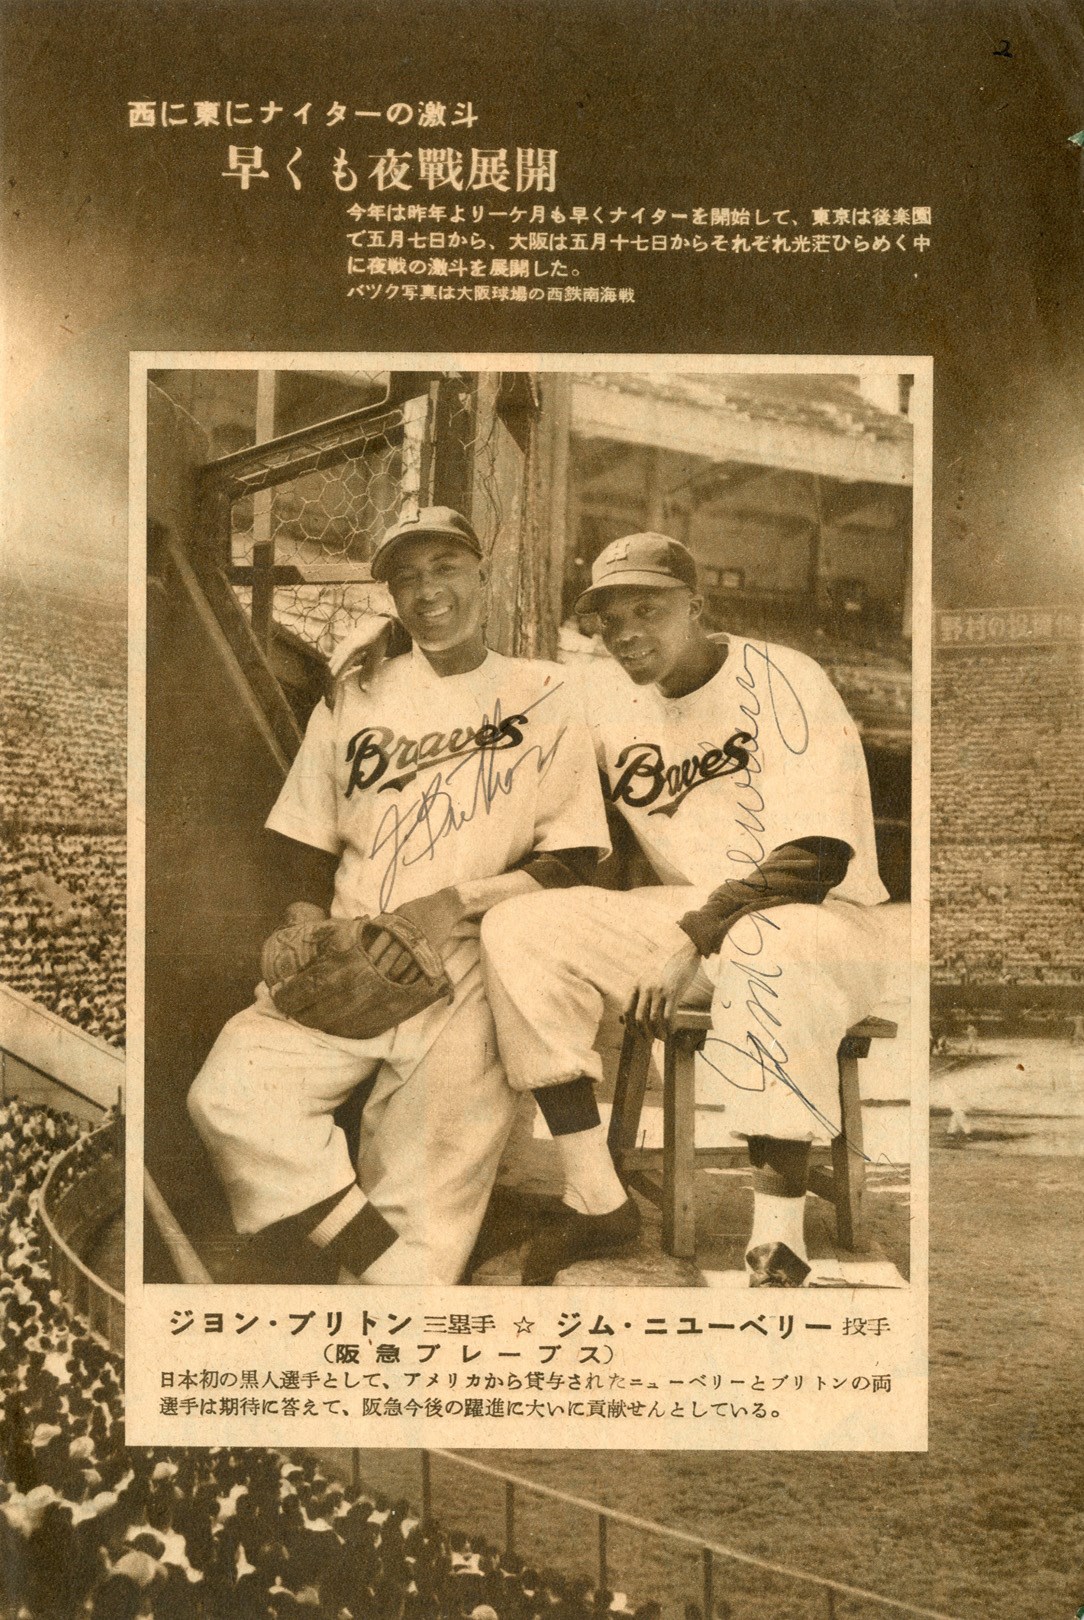 - First Negro Leaguers to Play Japanese Baseball Signed Page